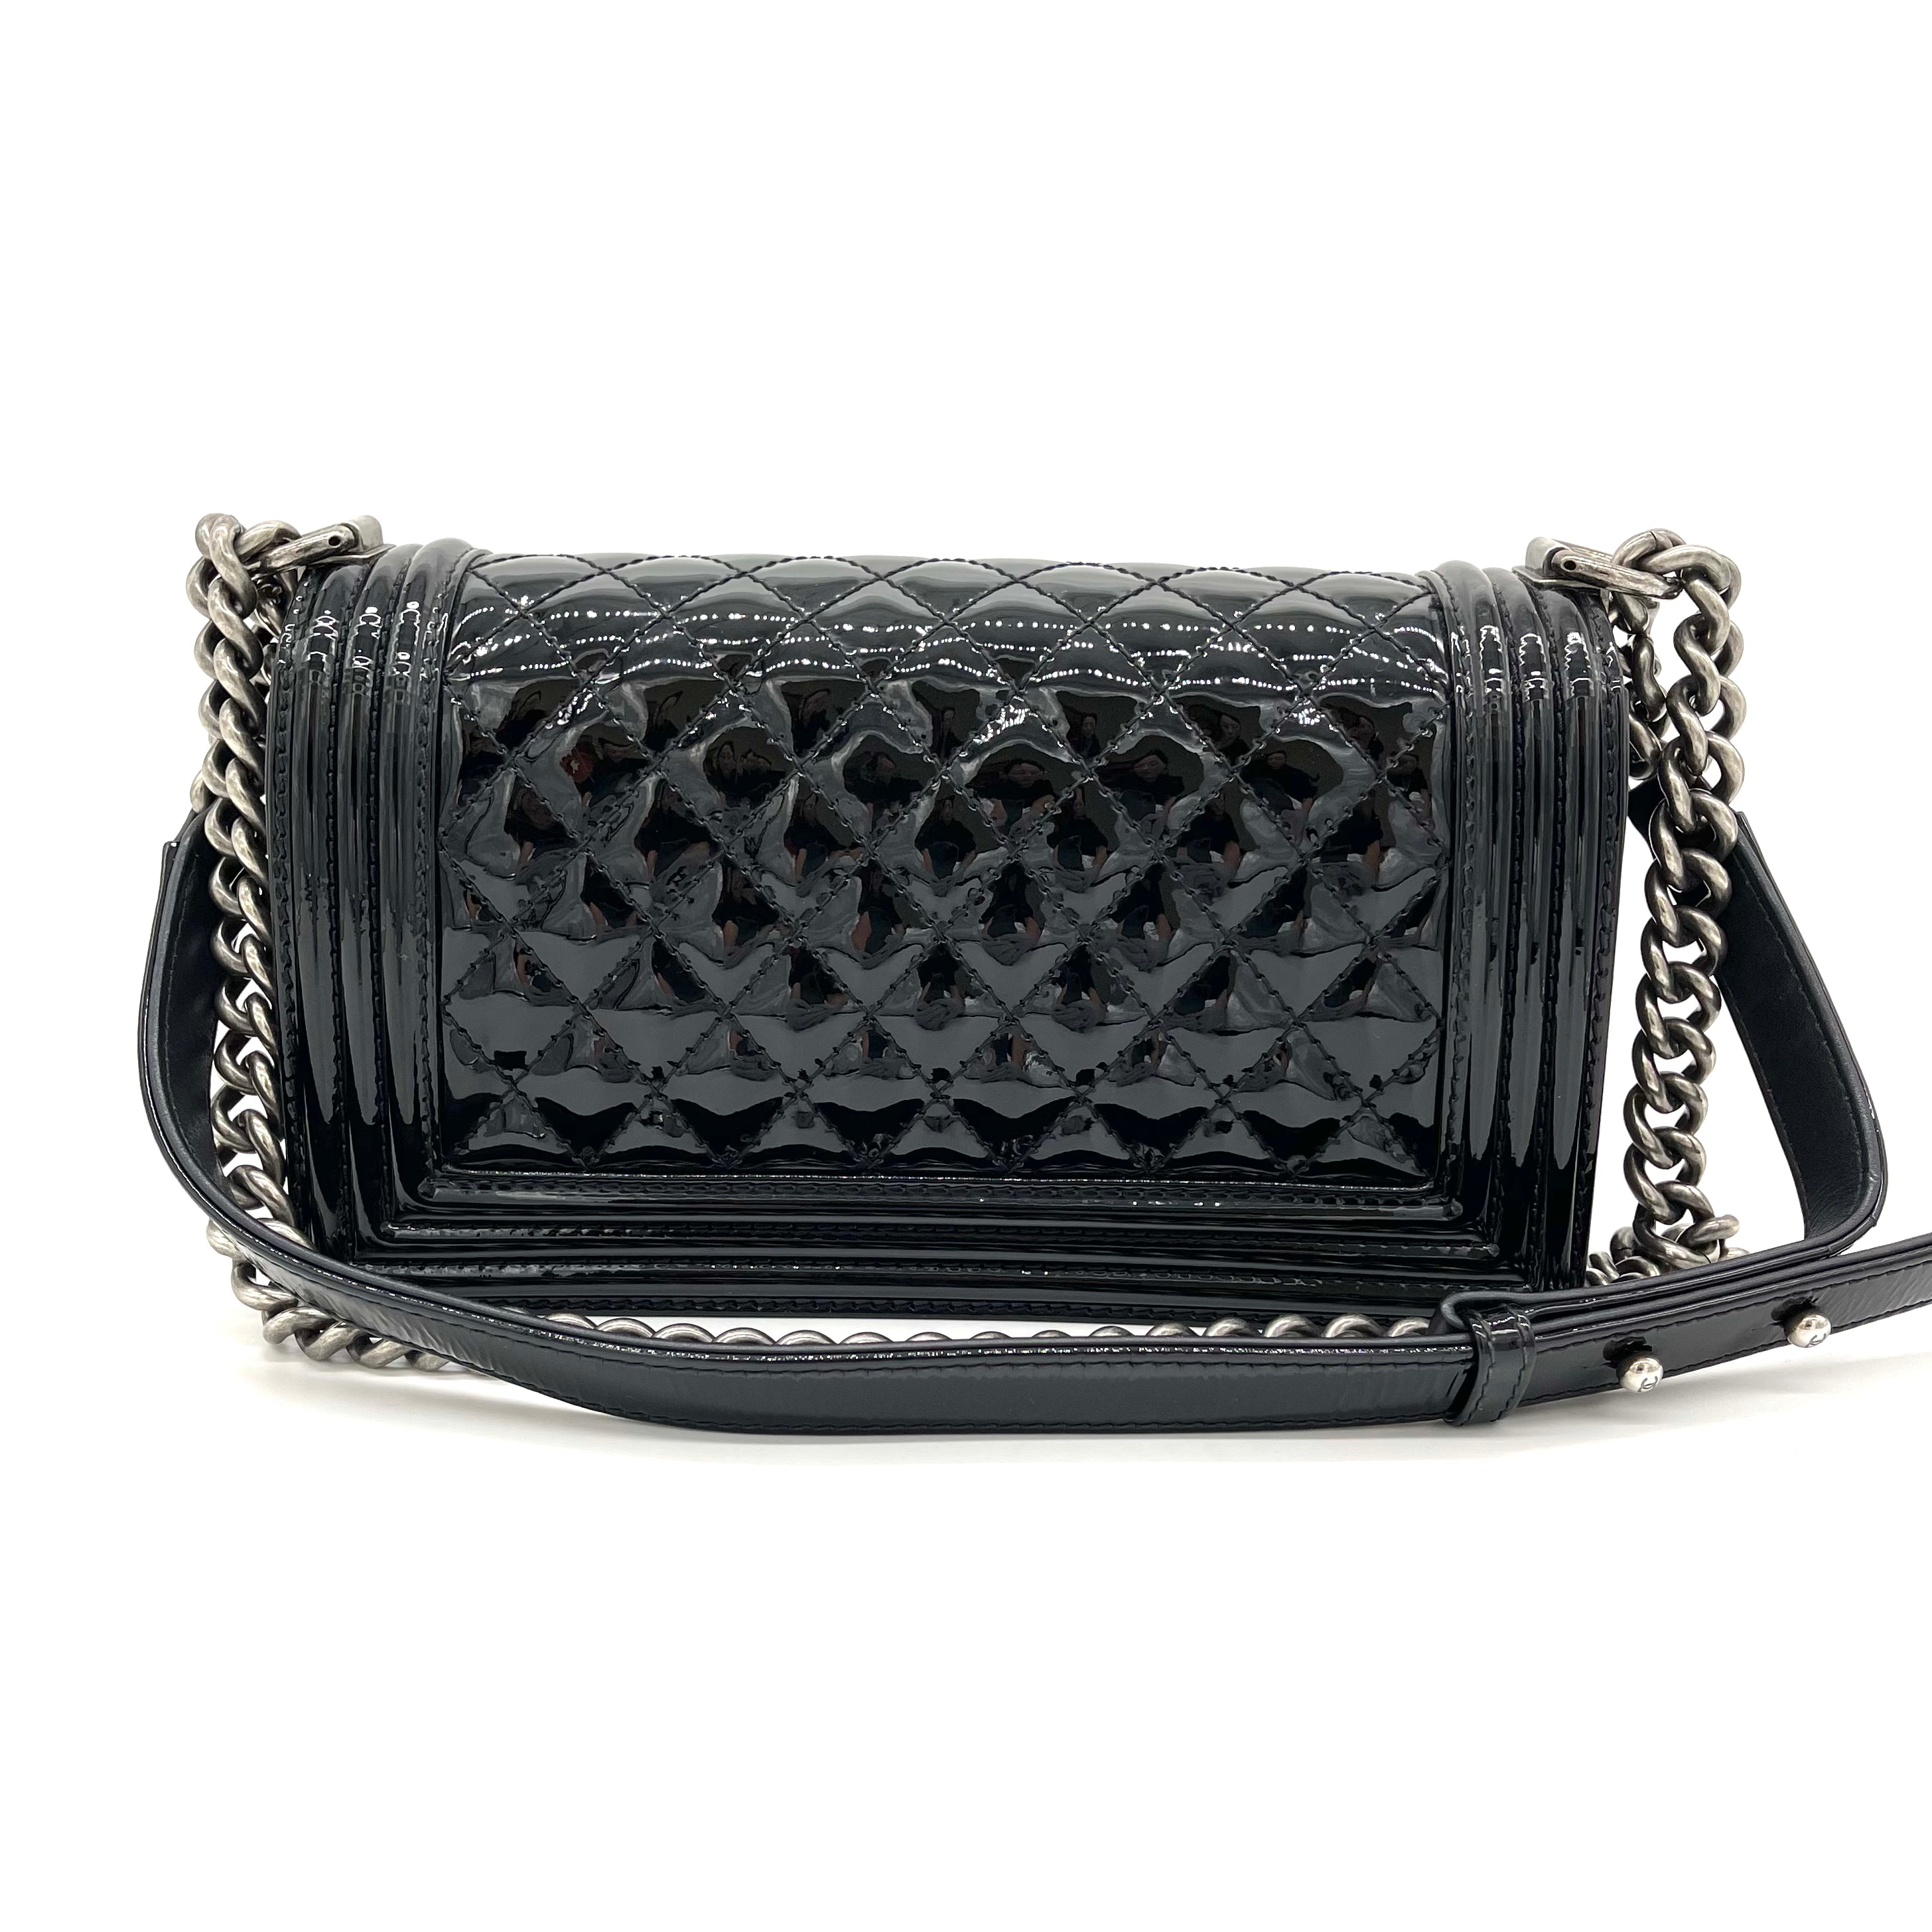 Chanel Black Quilted Patent Leather Medium Boy Bag